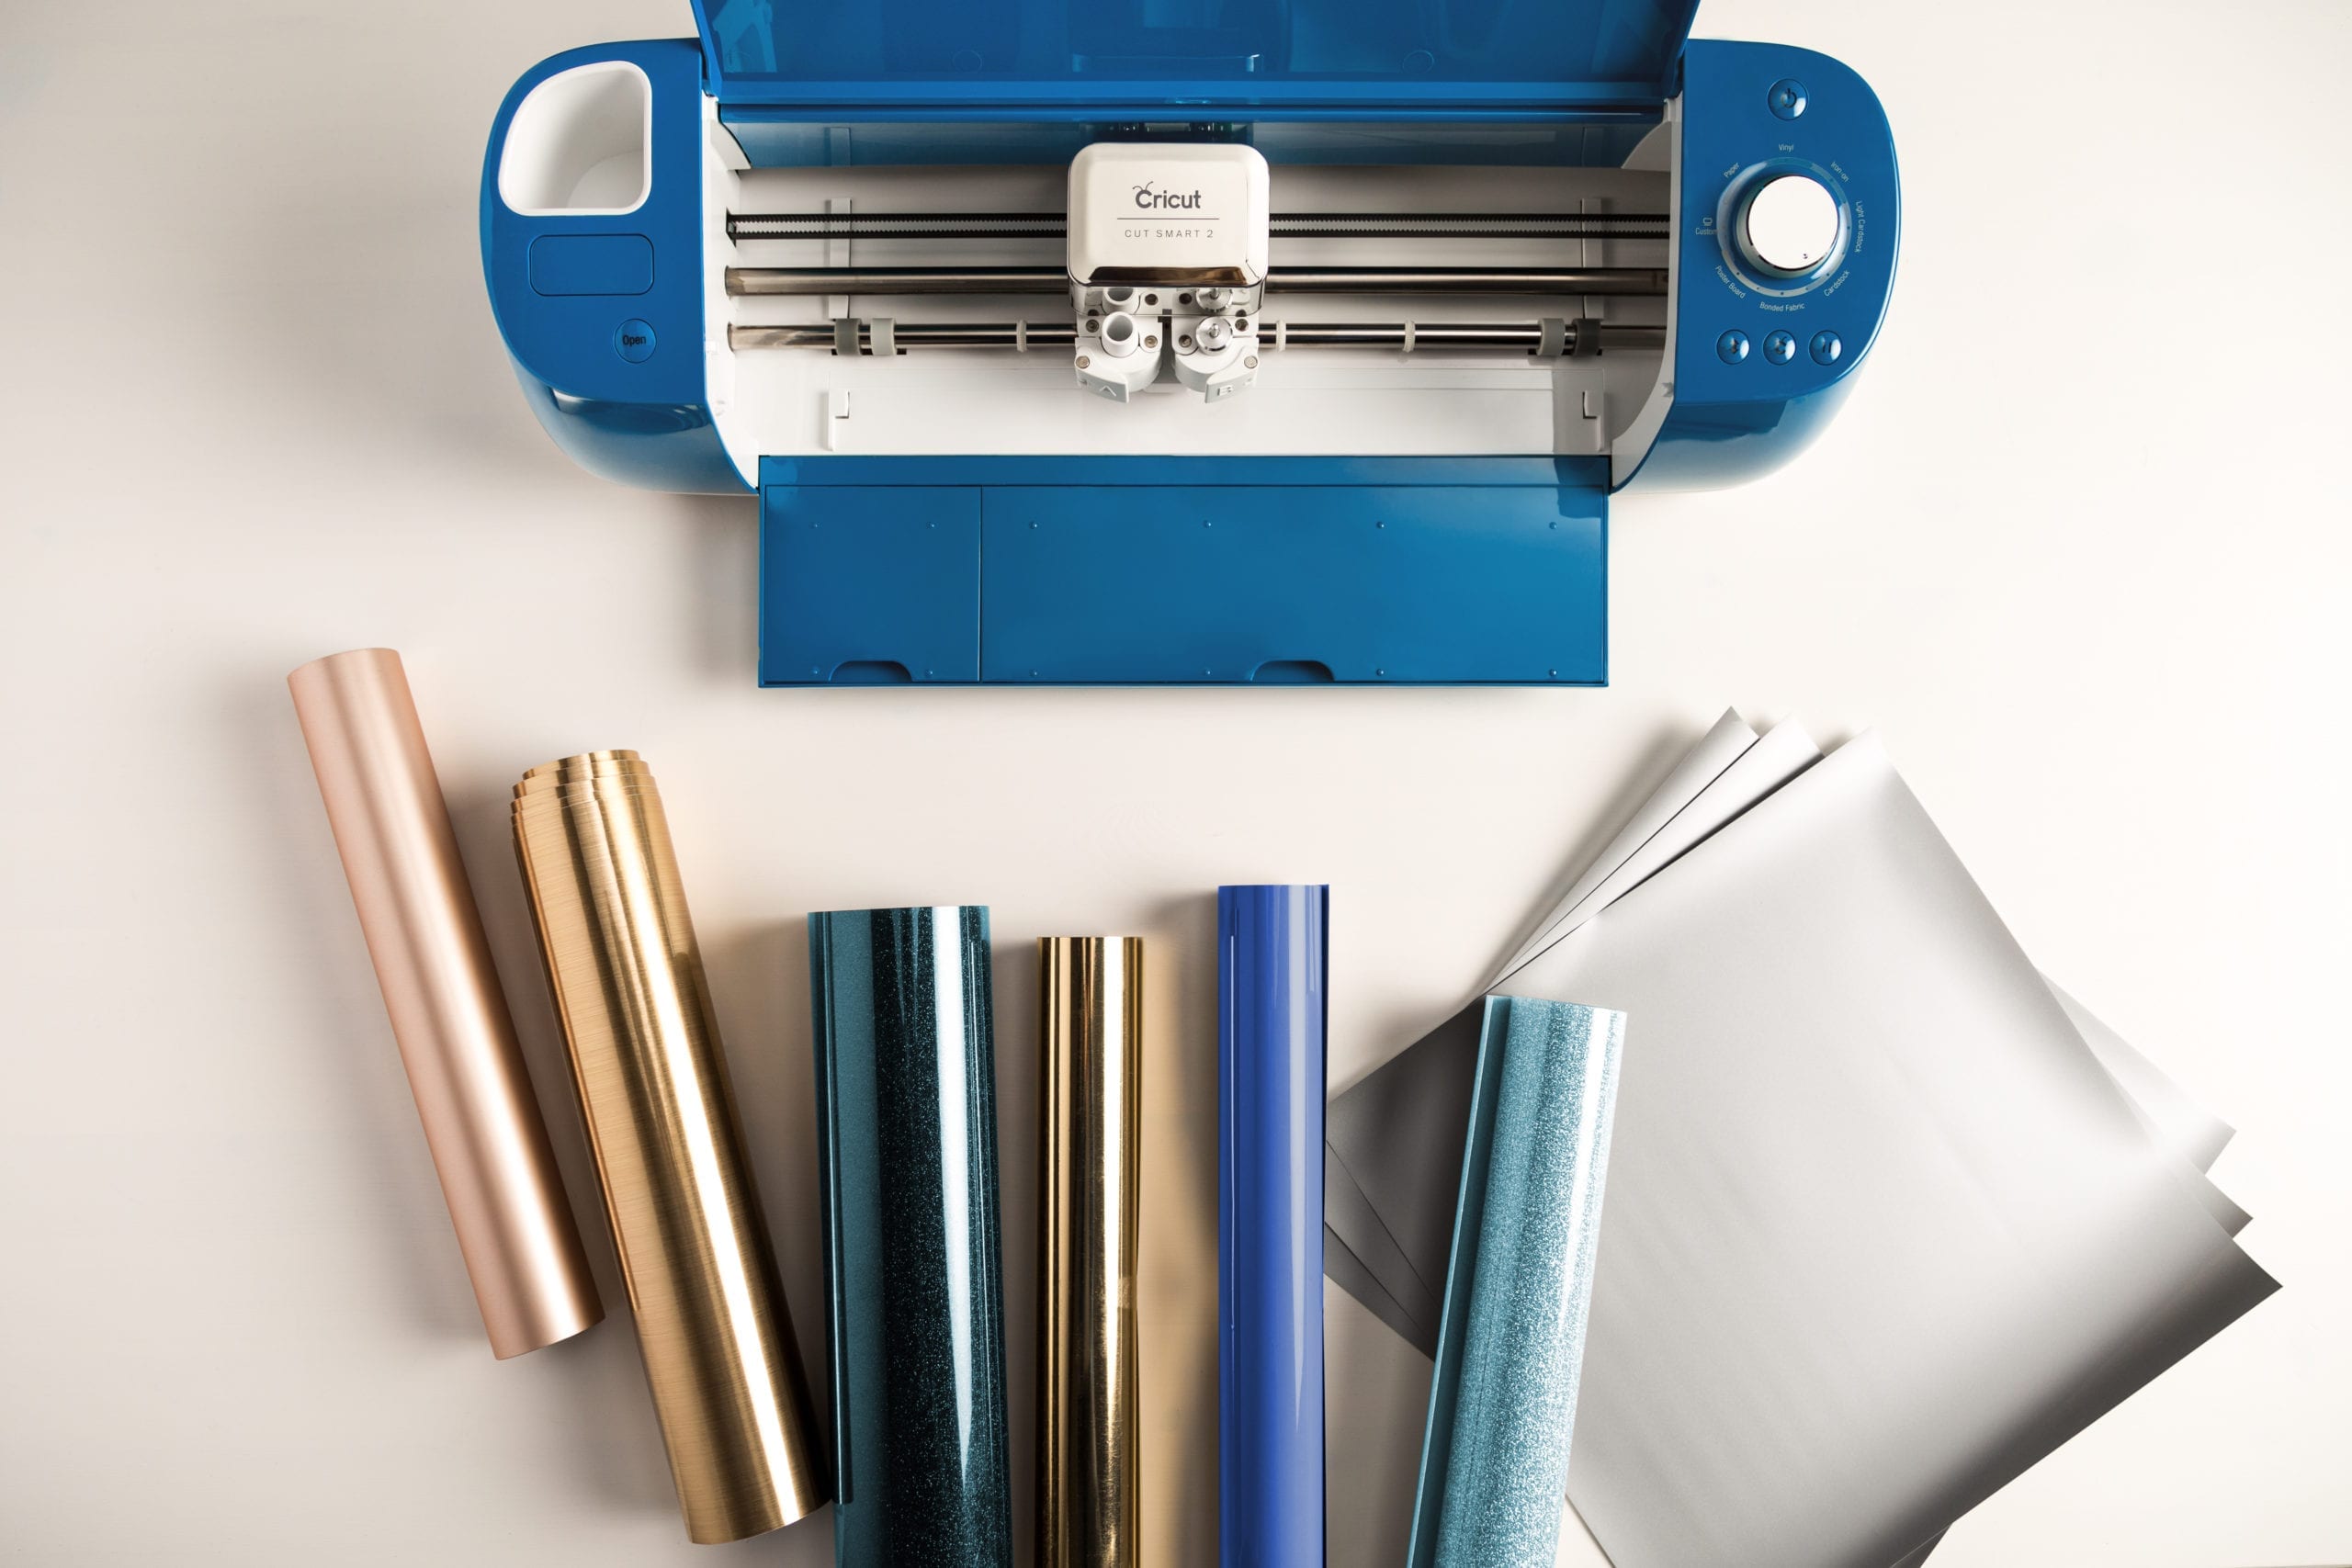 How to Get Creative With Holiday Gift Wrapping »